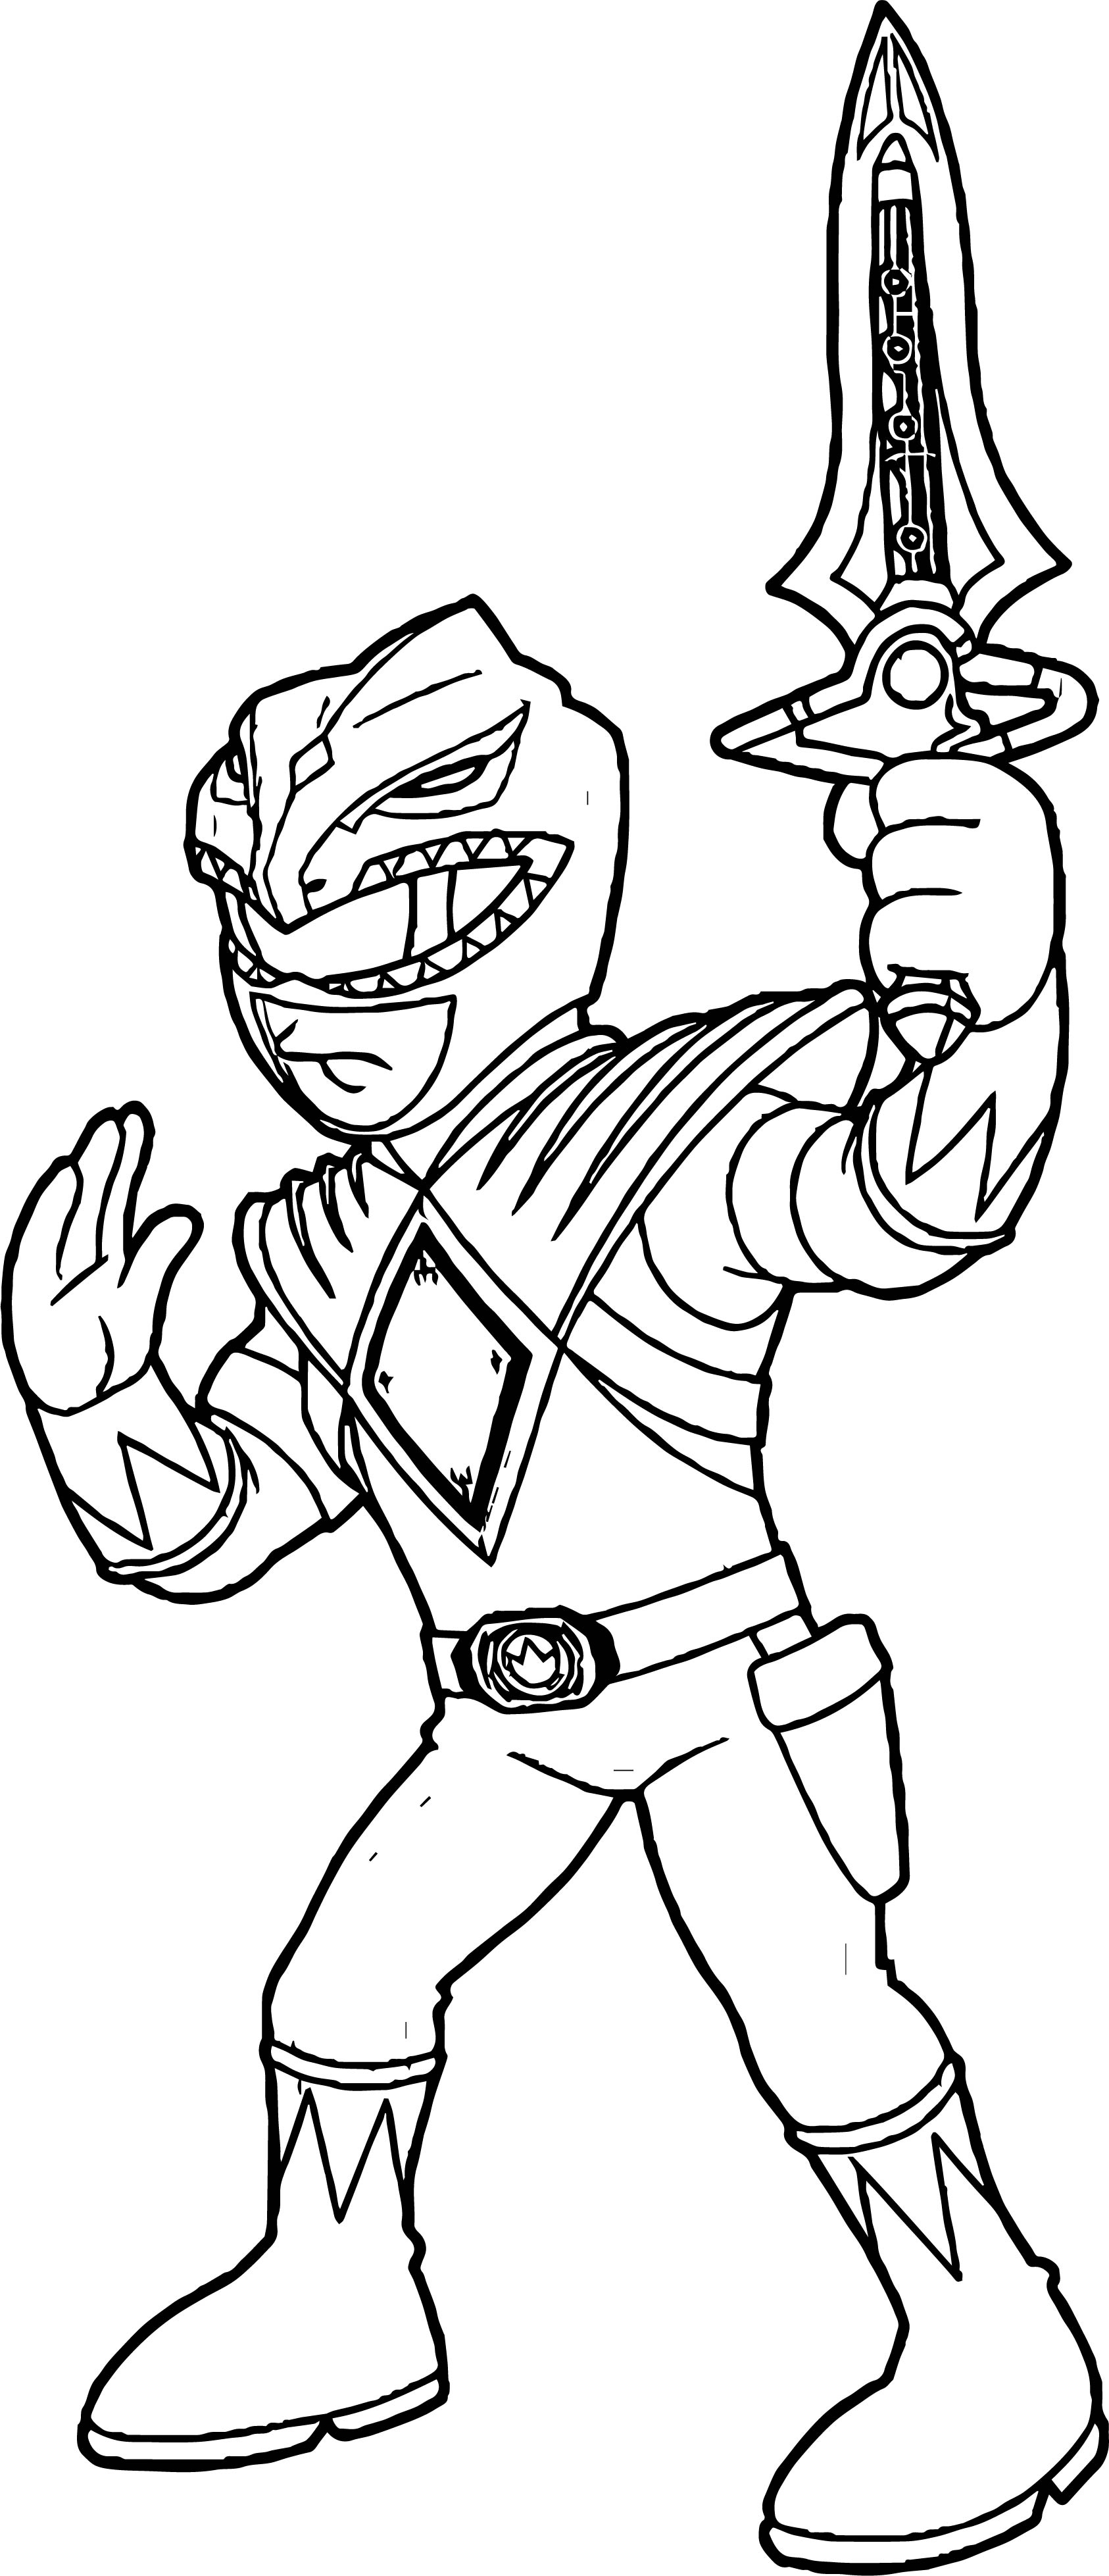 Blue Power Ranger Coloring Pages at Free printable colorings pages to print